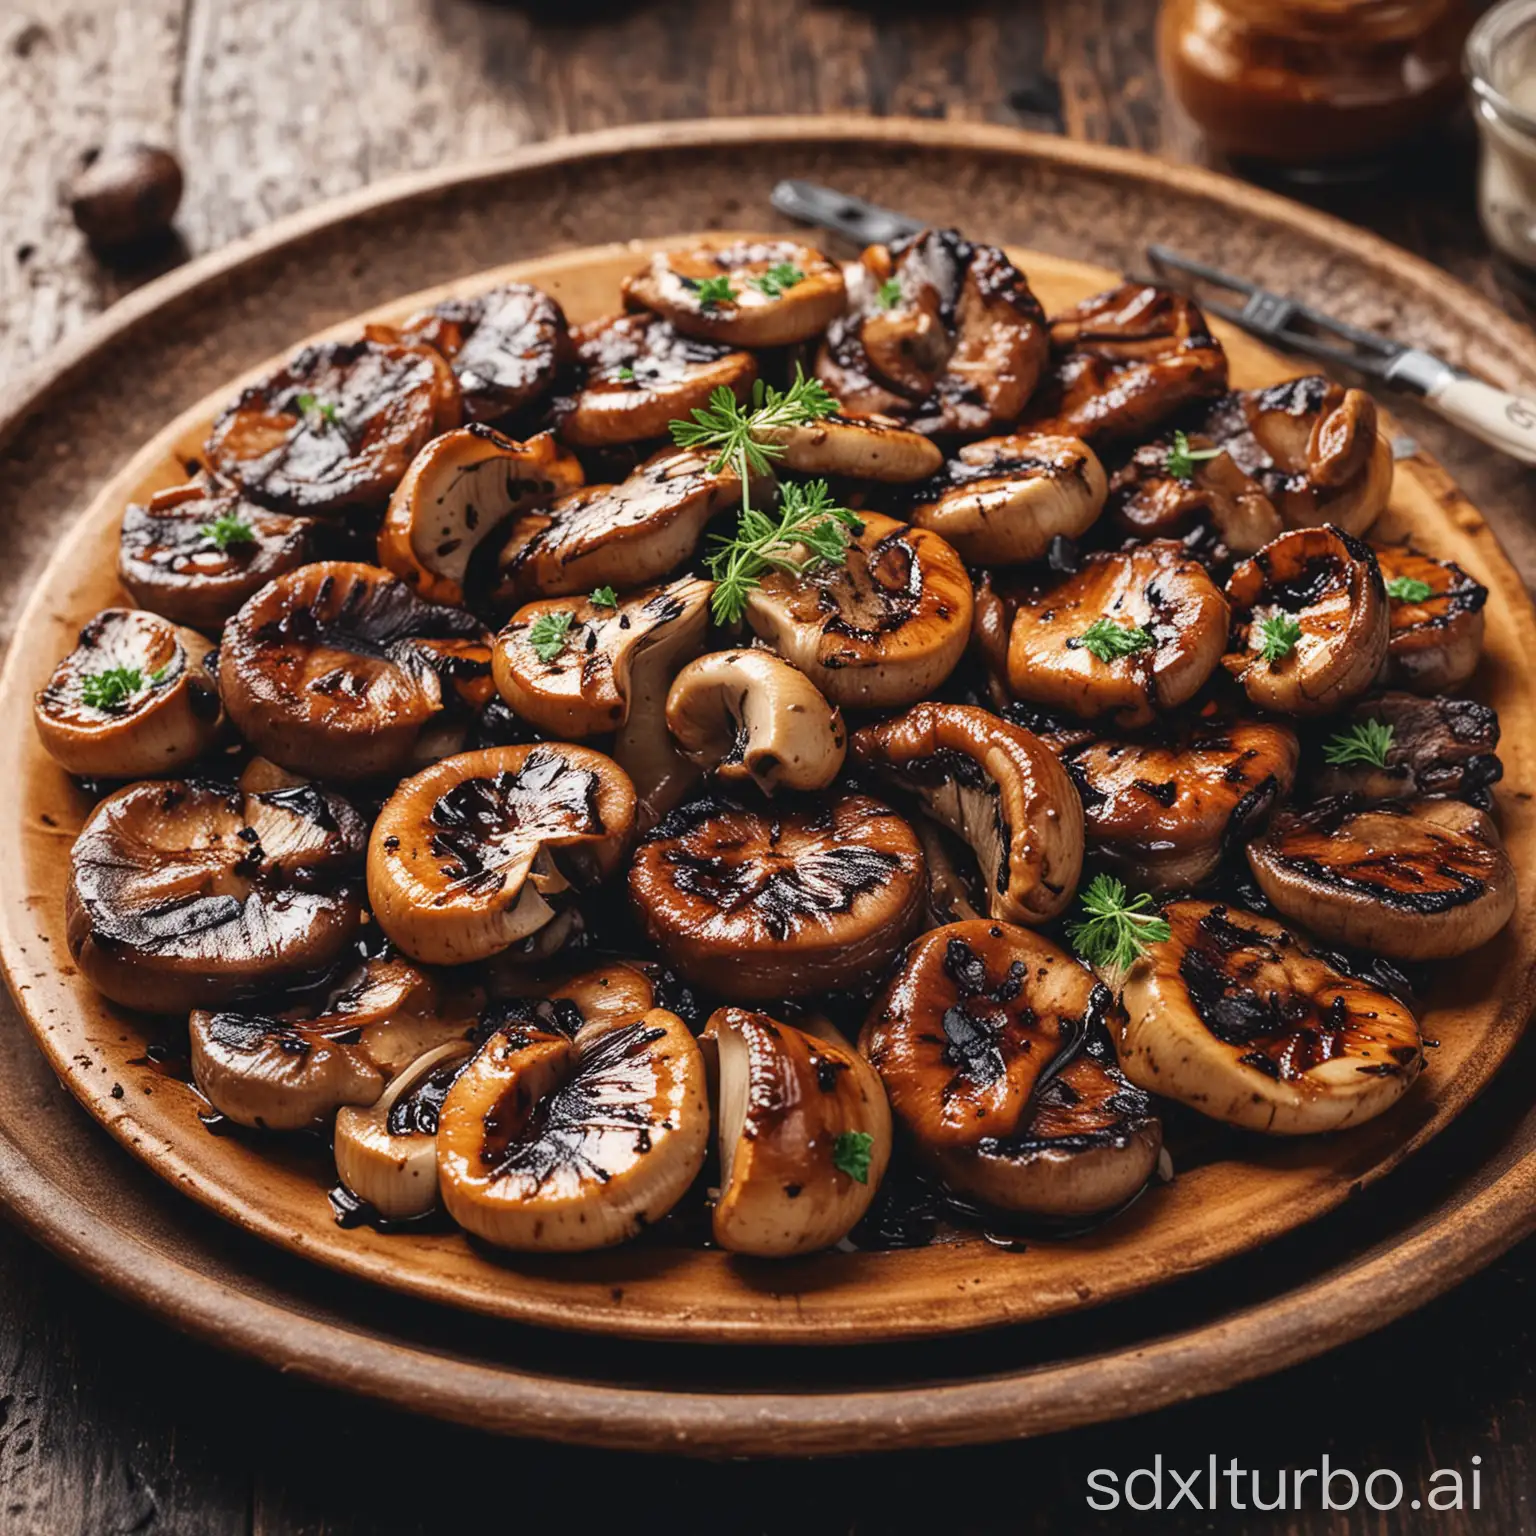 Grilled-Mushroom-BBQ-Plate-Mouthwatering-Presentation-in-a-Fancy-Restaurant-Setting